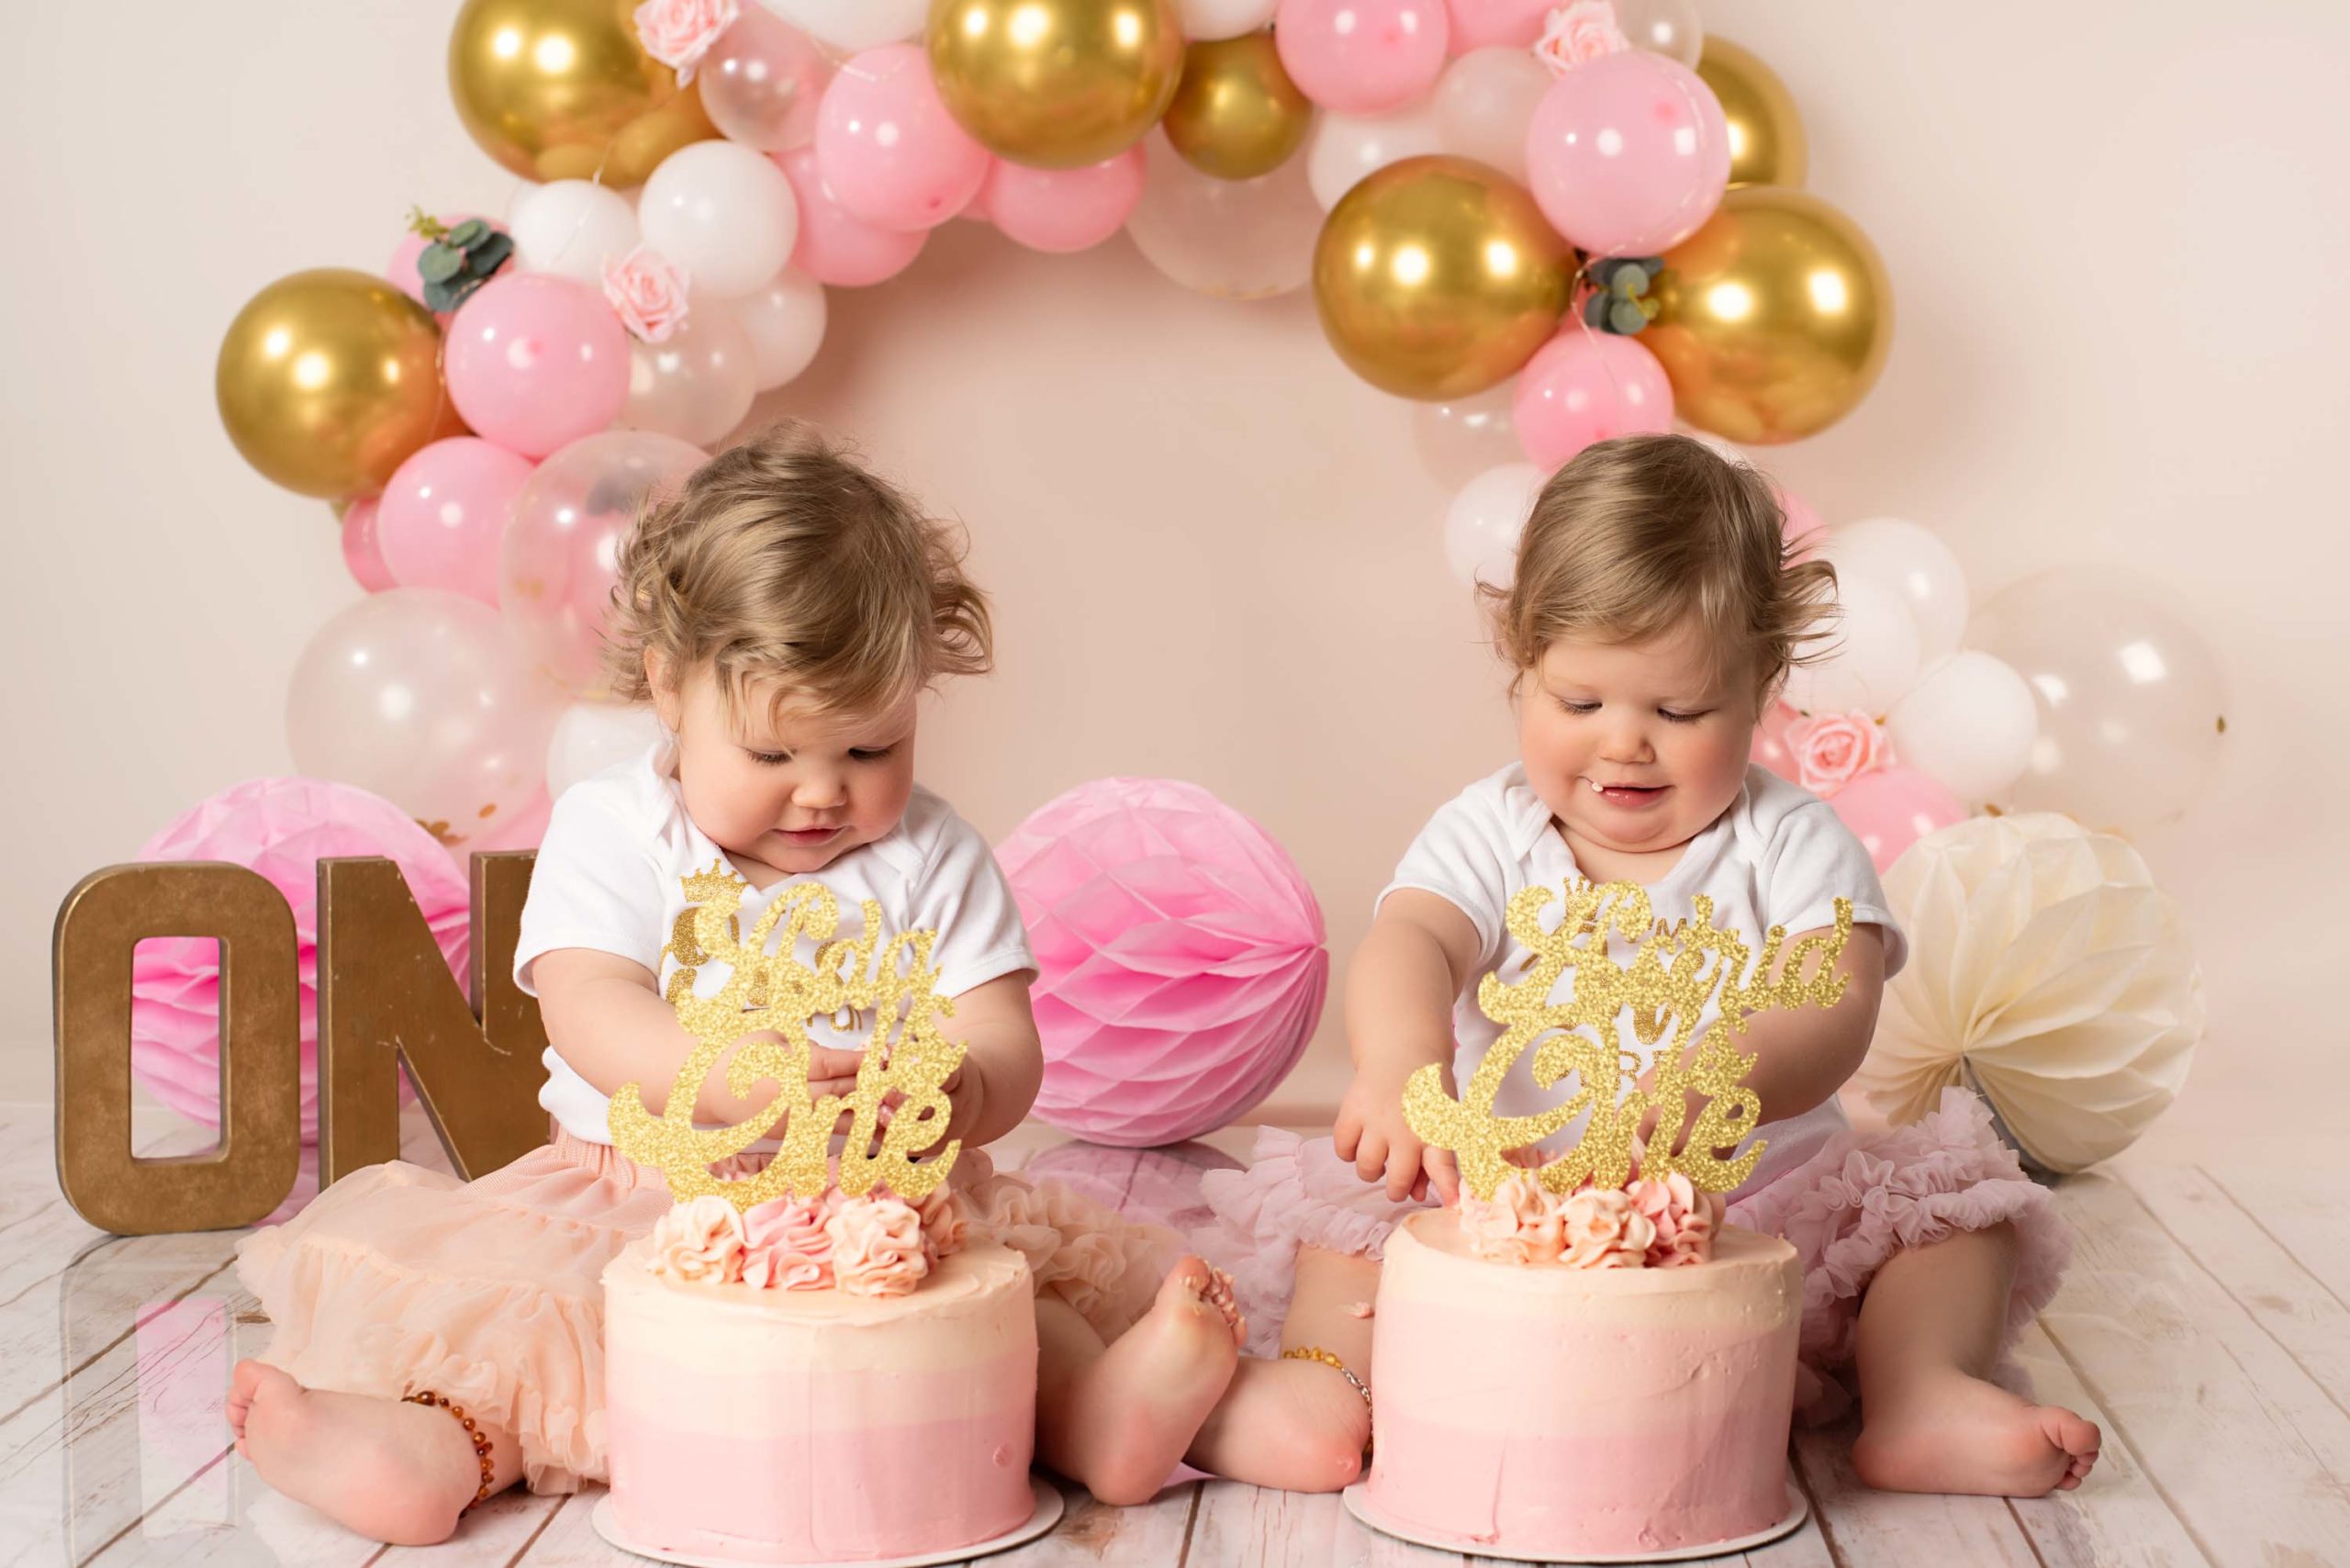 Twins babies getting stuck into cakes at their photoshoot